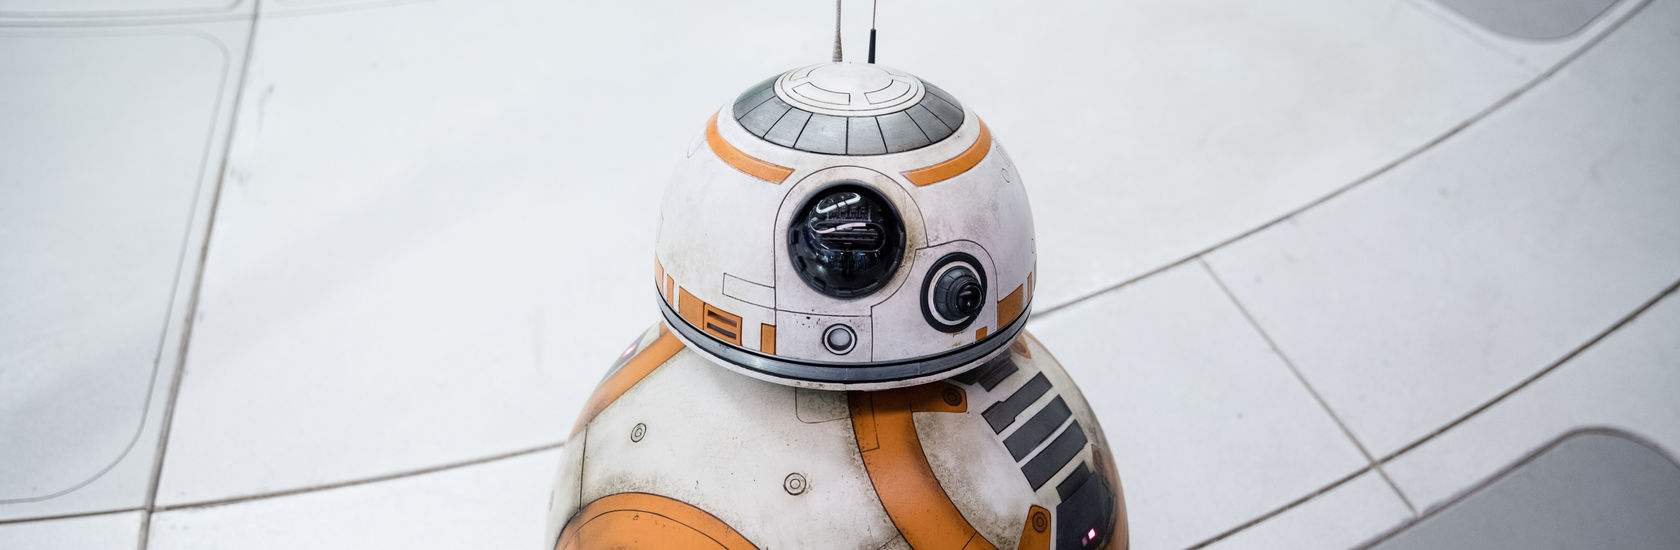 Disney Archives Welcomes Star Wars Props, Costumes